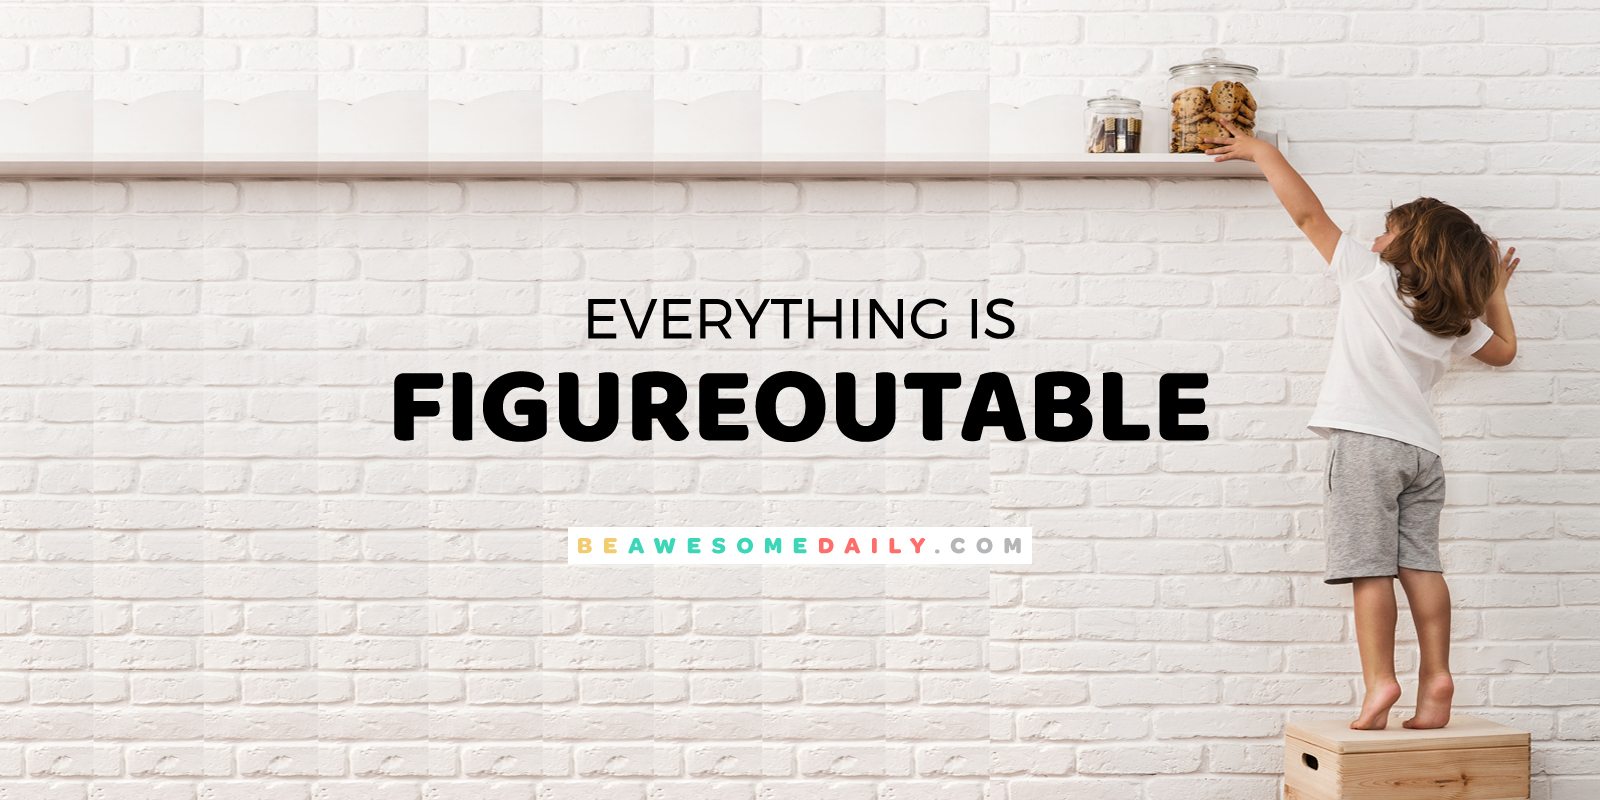 Everything is ones. Everything is figureoutable. Everything is figureoutable book. Книга everything is figureoutable. Обои everything.